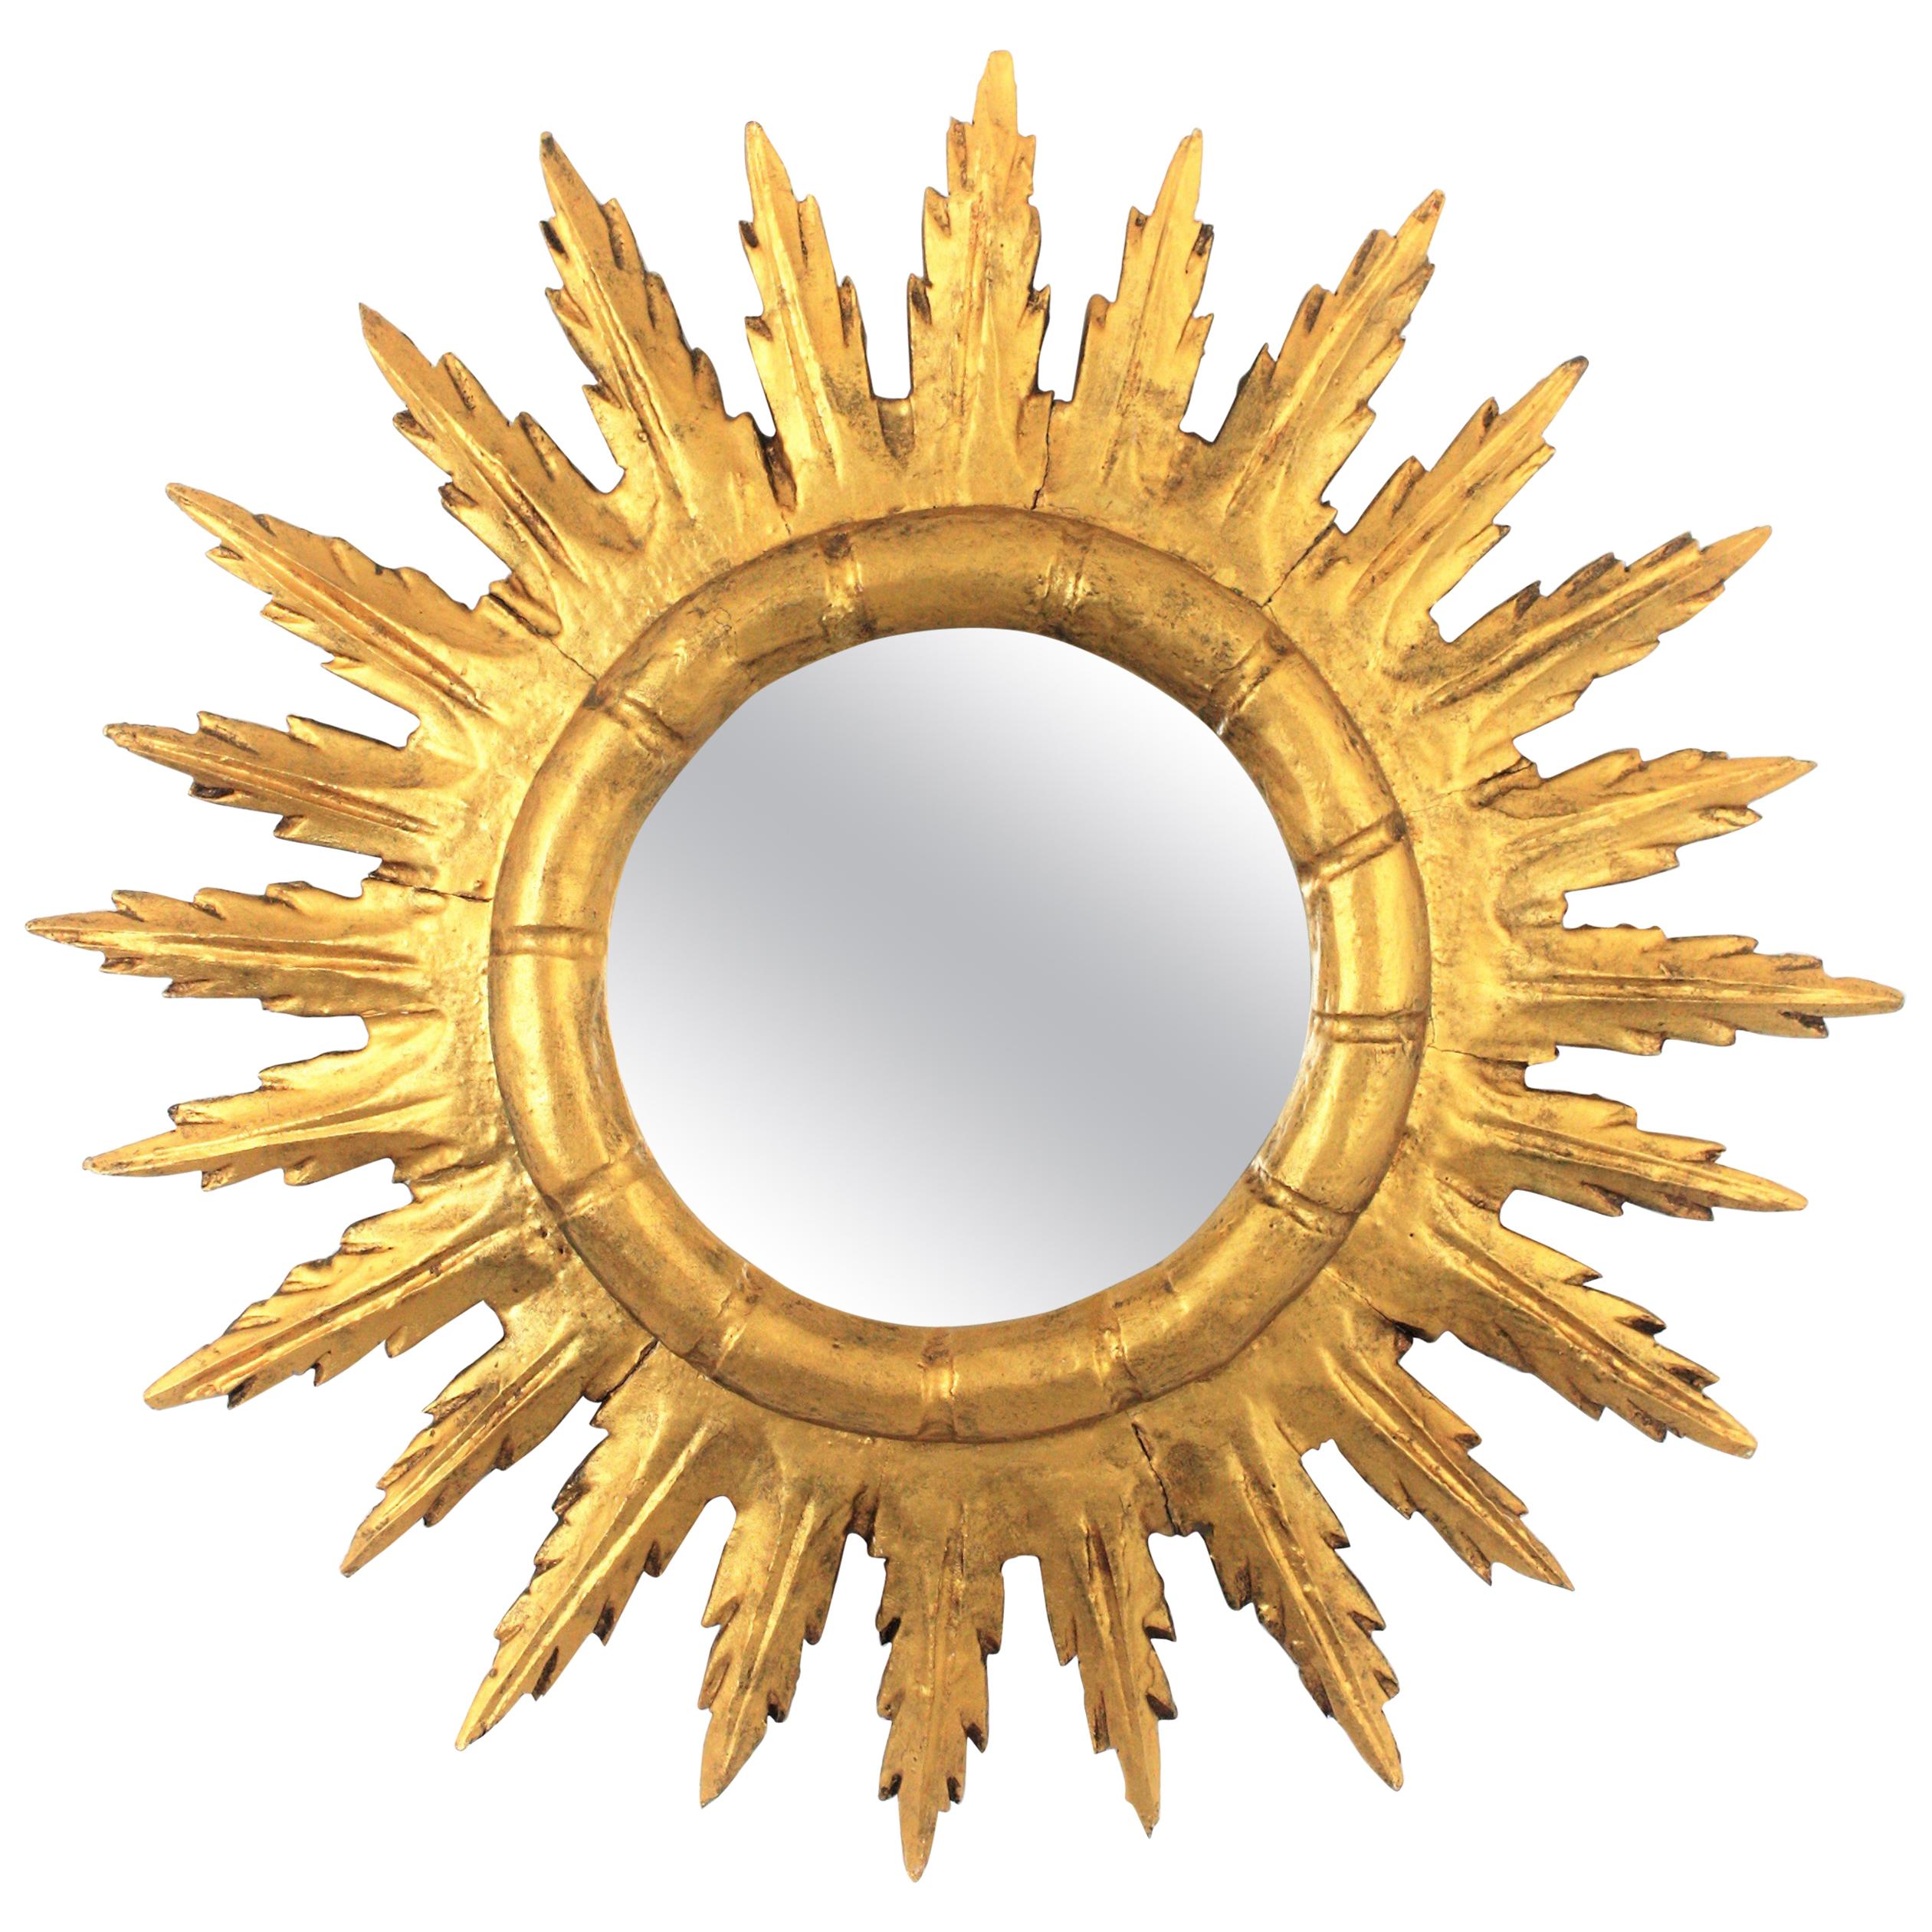 Gold leaf giltwood sunburst mirror in Baroque style. Spain, 1950s.
Eye-catching hand carved wood sunburst mirror covered with gesso and gold leaf finishing.
A lovely mirror to be placed alone or as a part of a wall composition with more mirrors in